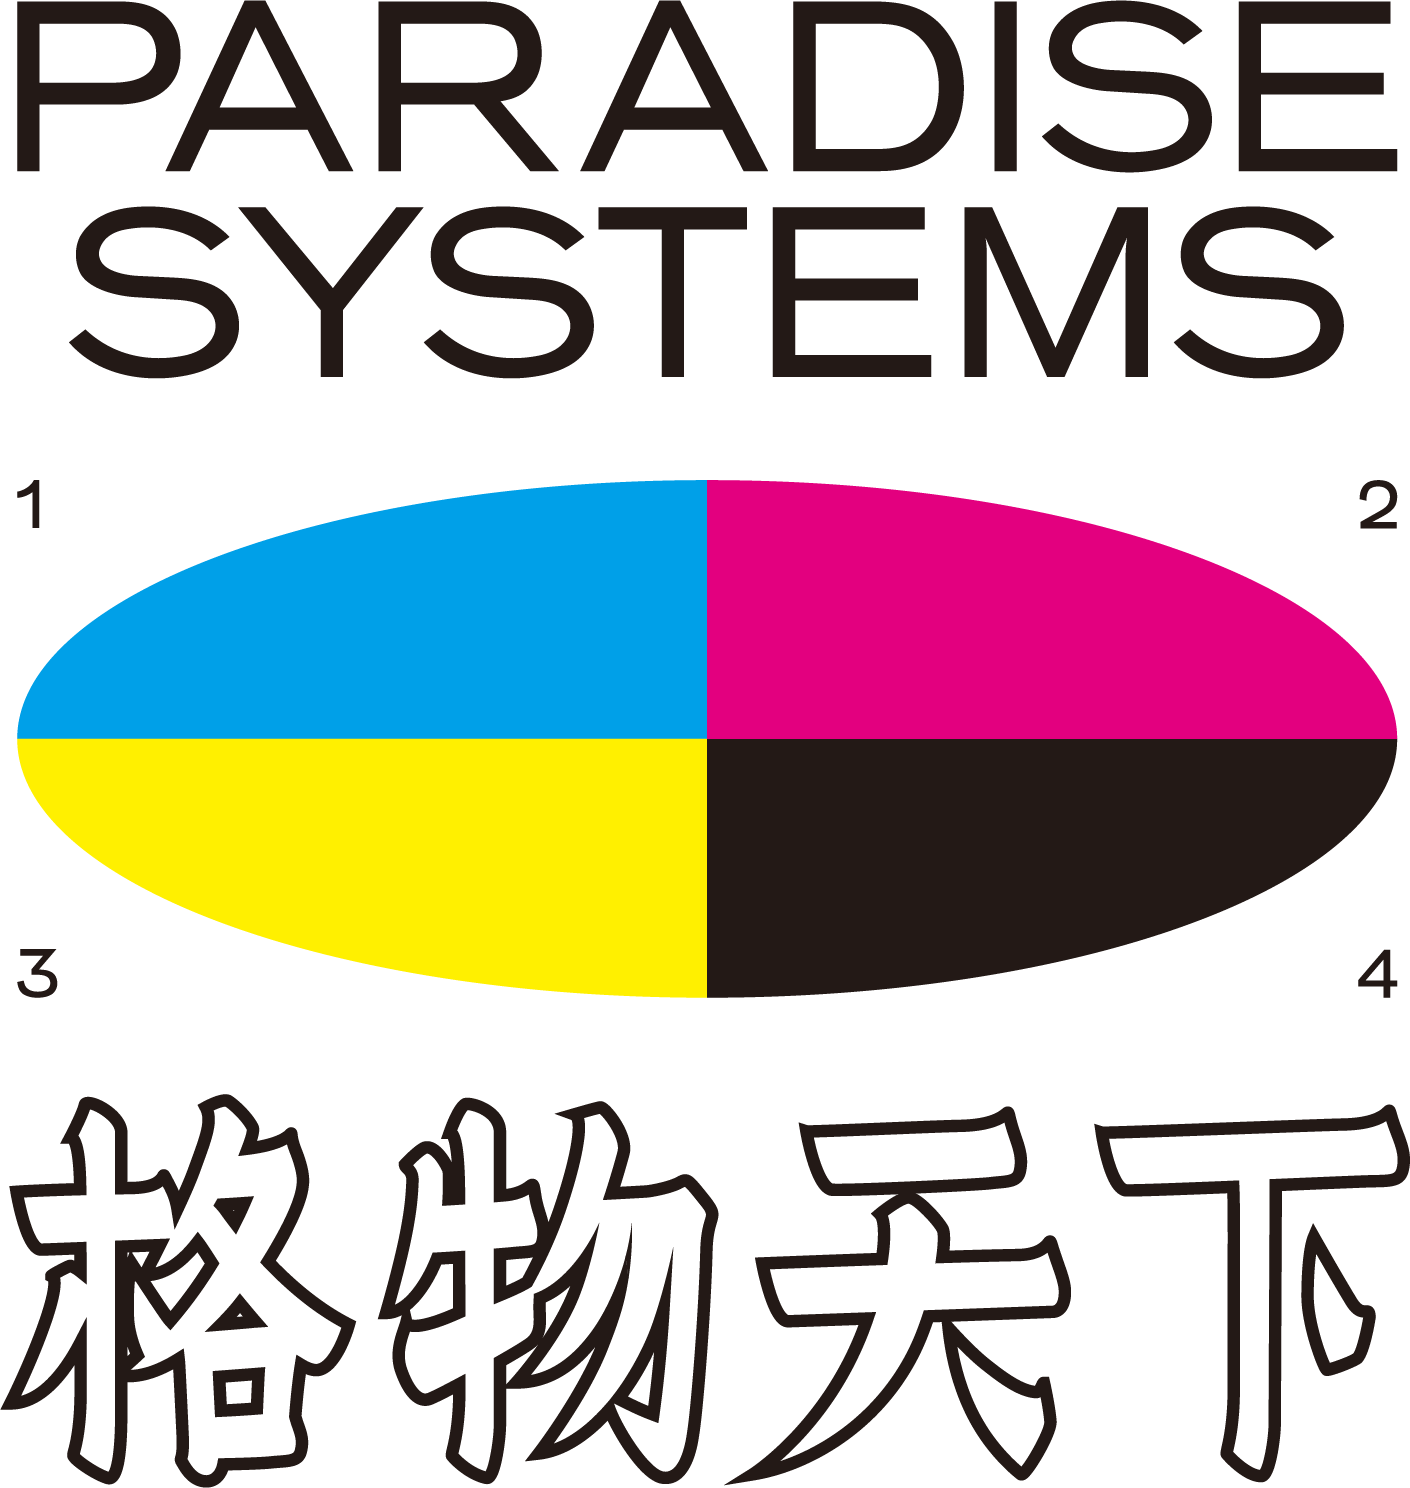 Paradise Systems